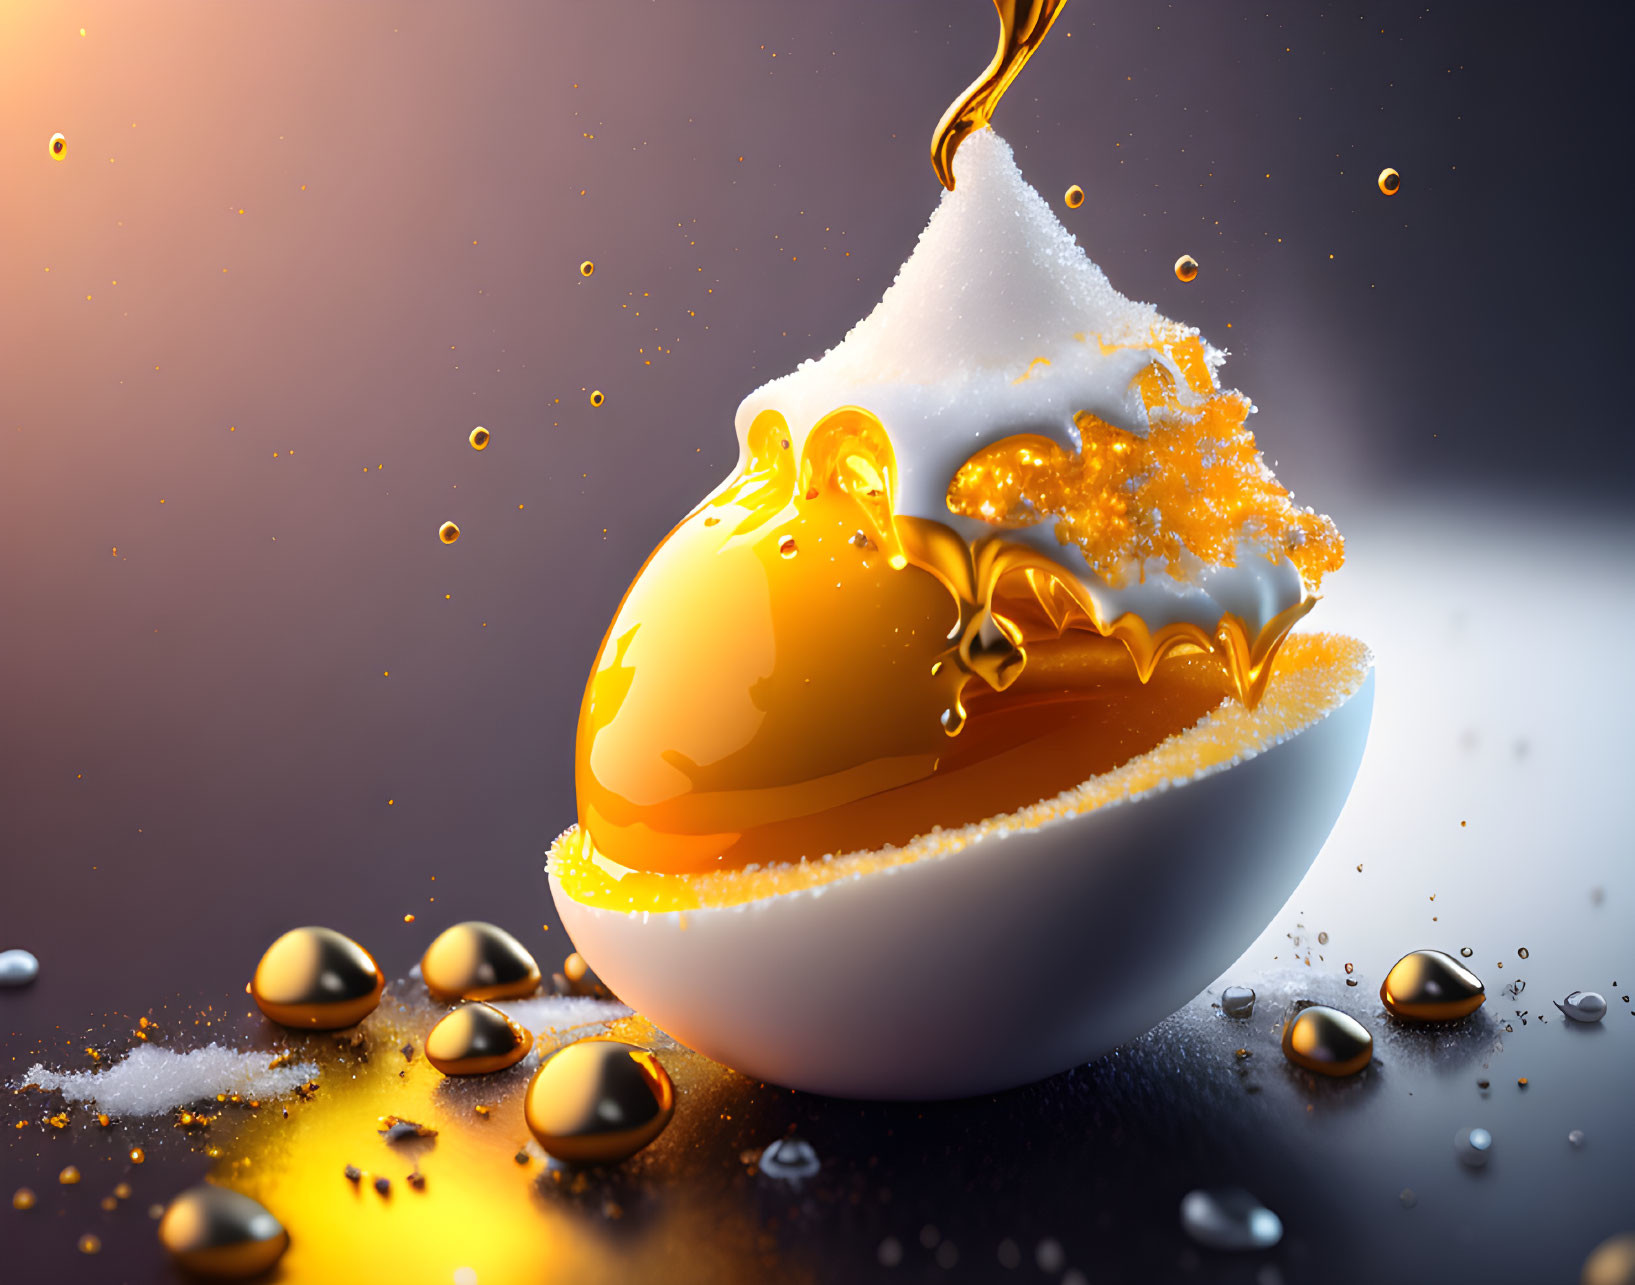 Digital artwork: Golden yolk oozing from cracked egg with droplets and granules